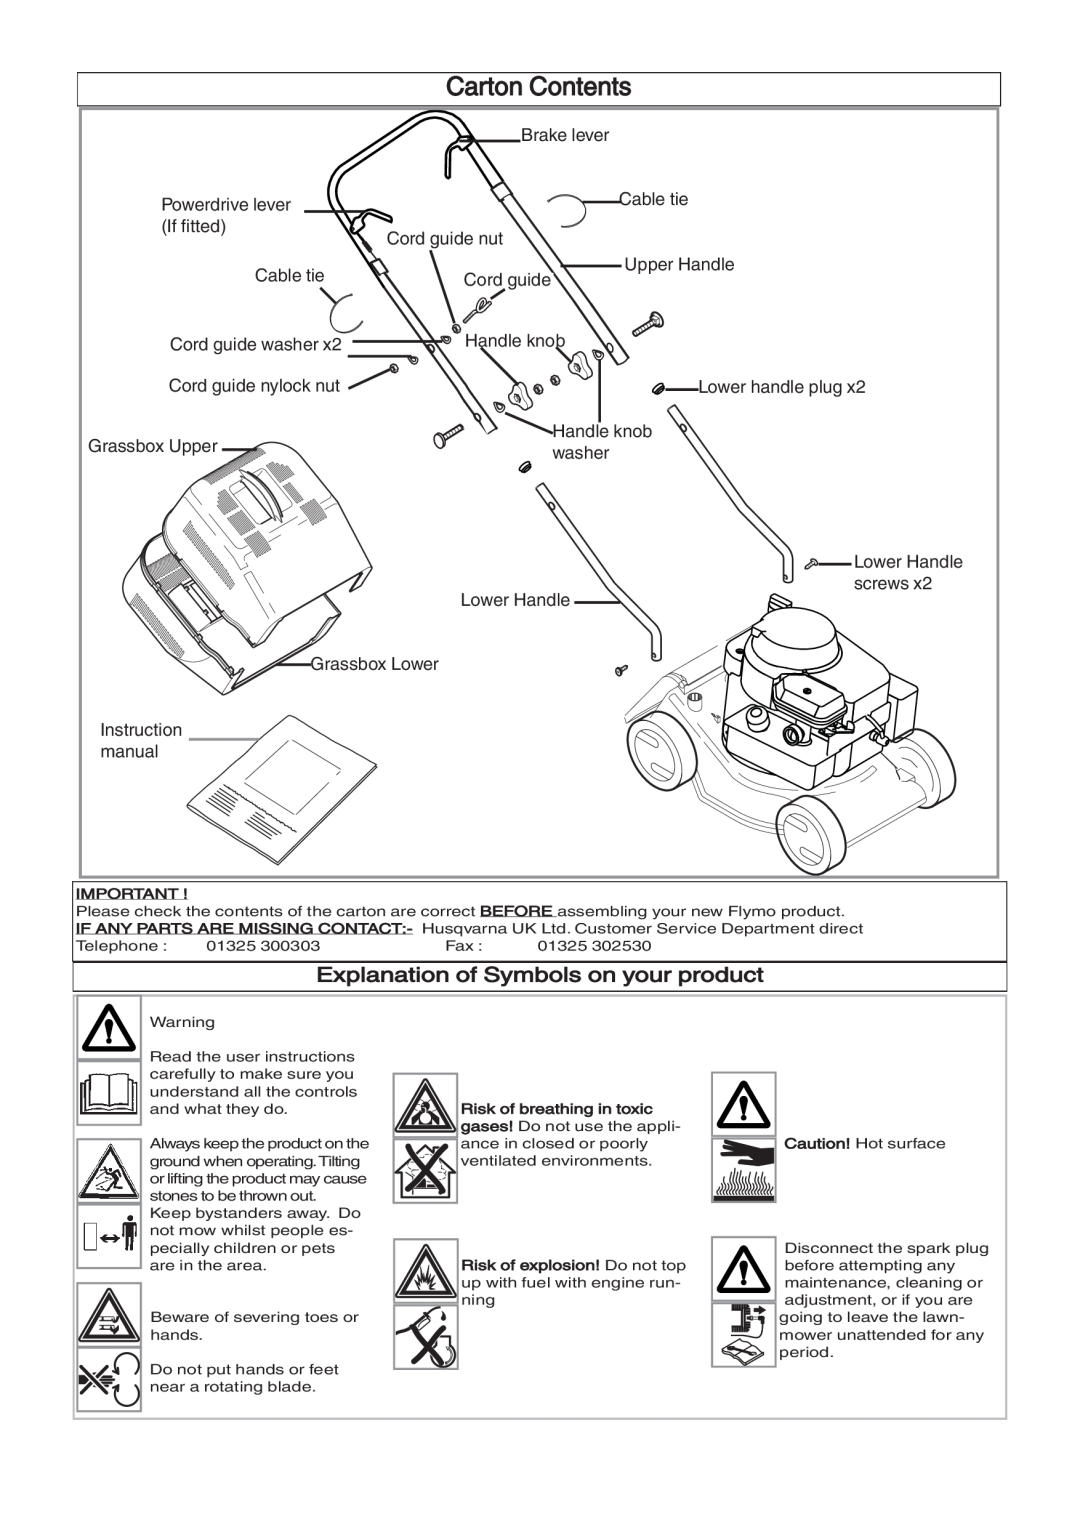 Husqvarna 965984601, 965969201, 965969301, 965984501, 965969501 manual Carton Contents, Explanation of Symbols on your product 